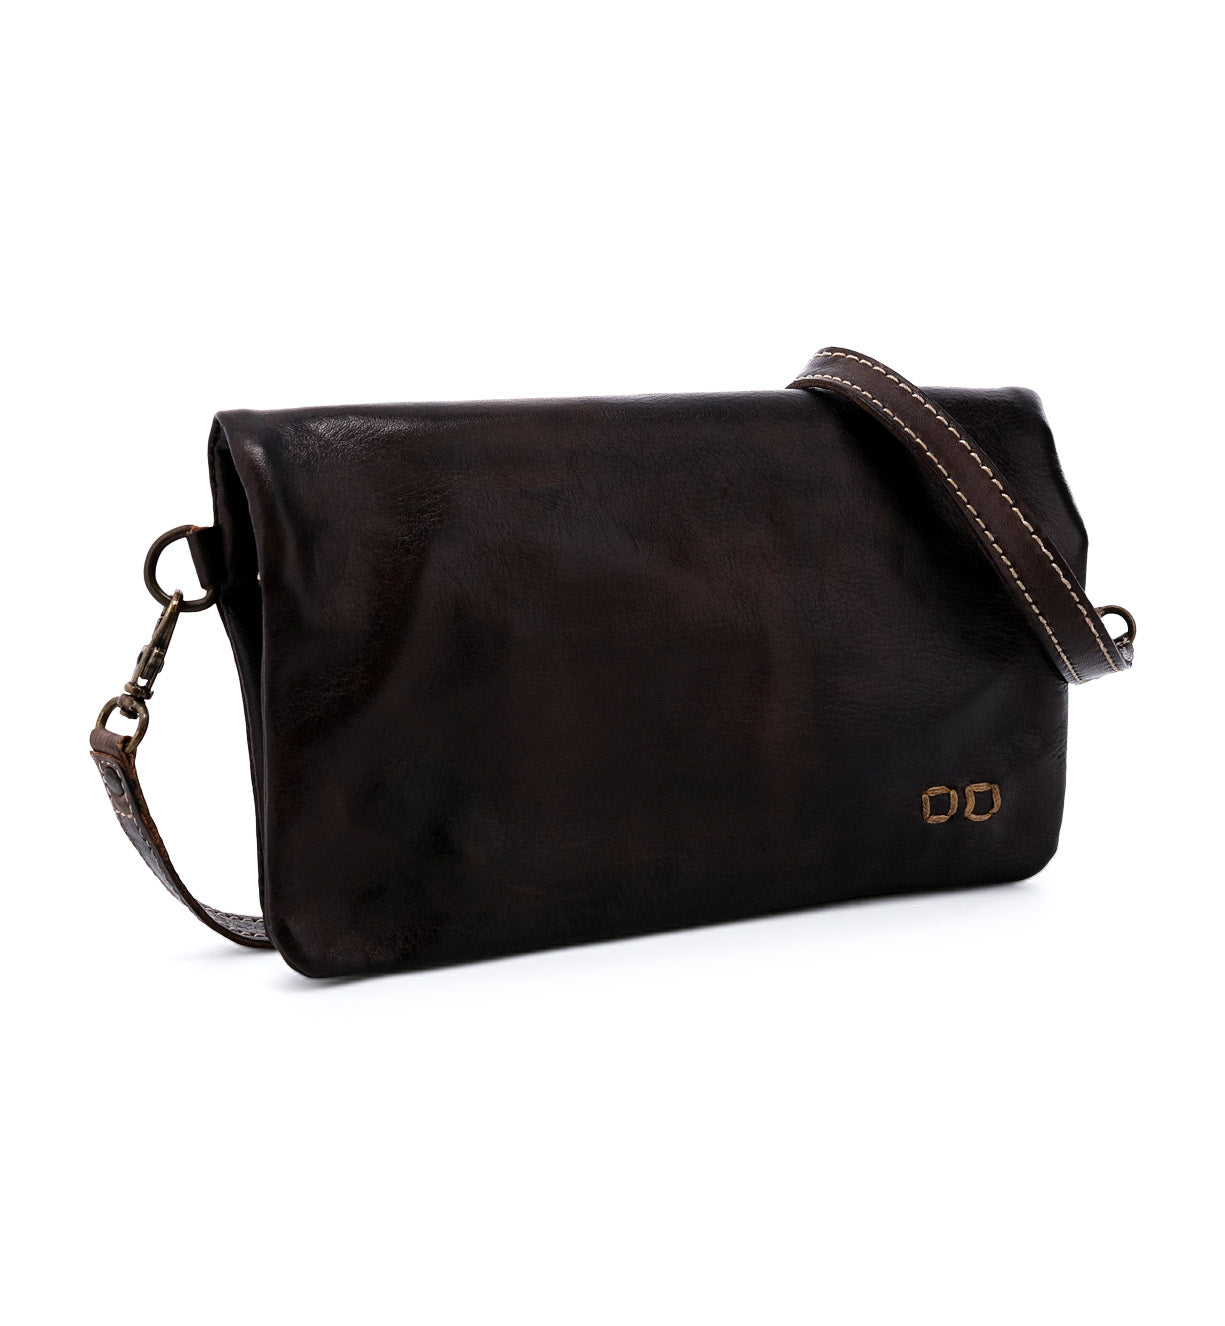 A Cadence brown leather crossbody bag with an adjustable strap by Bed Stu.